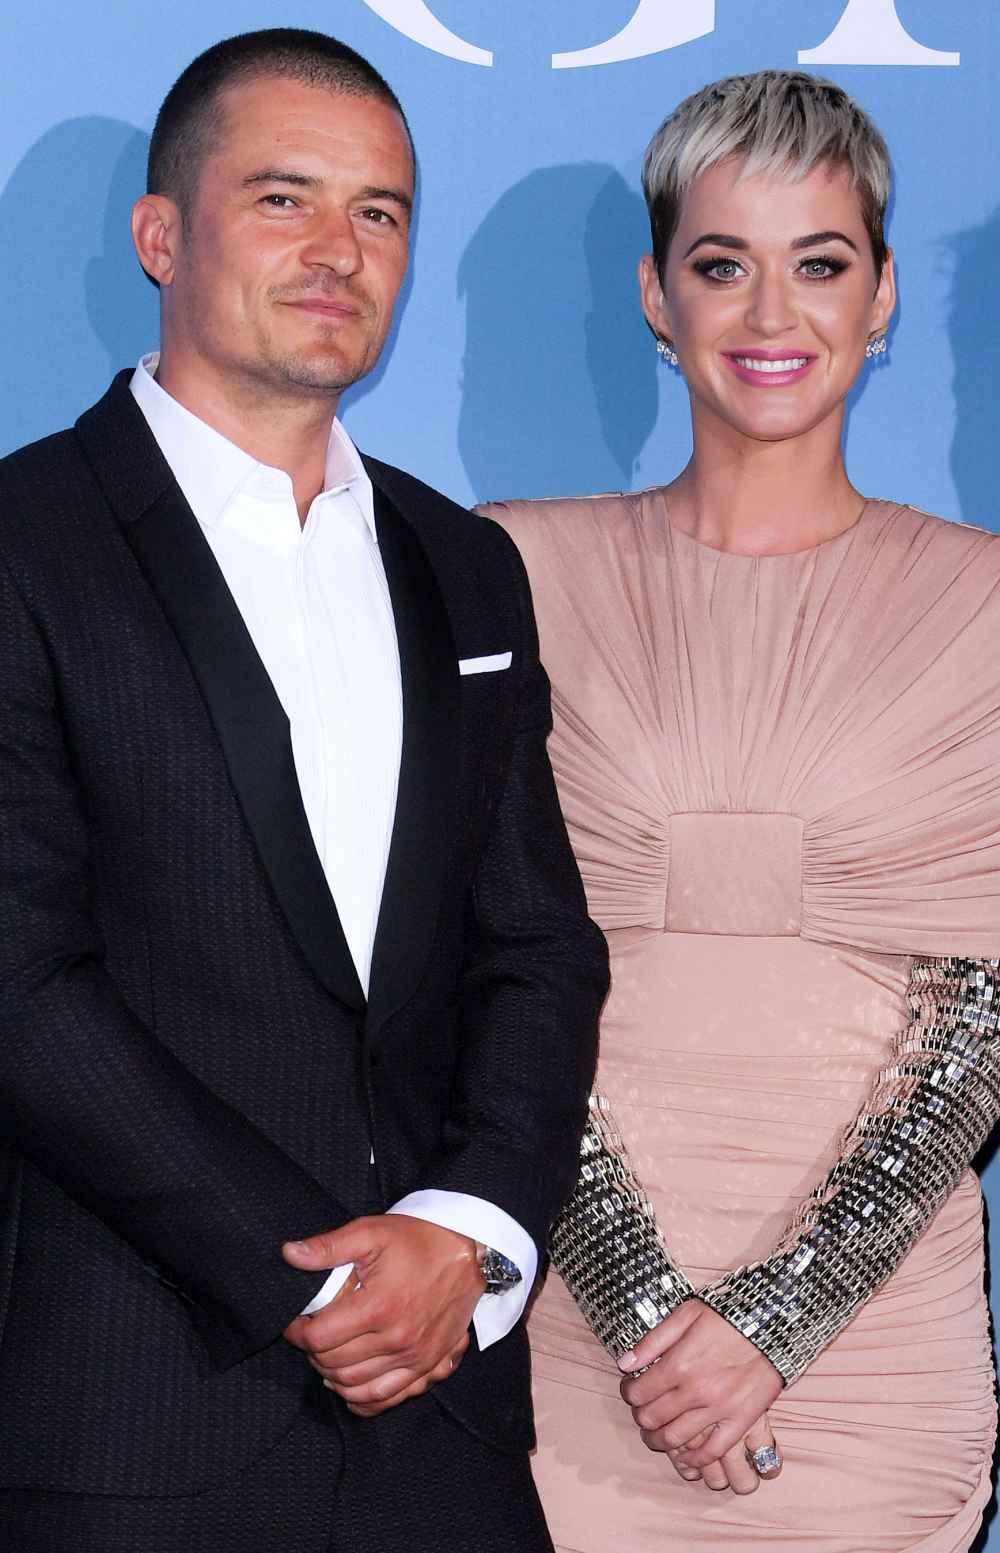 Katy Perry Says Her Romance With Orlando Bloom Has Friction